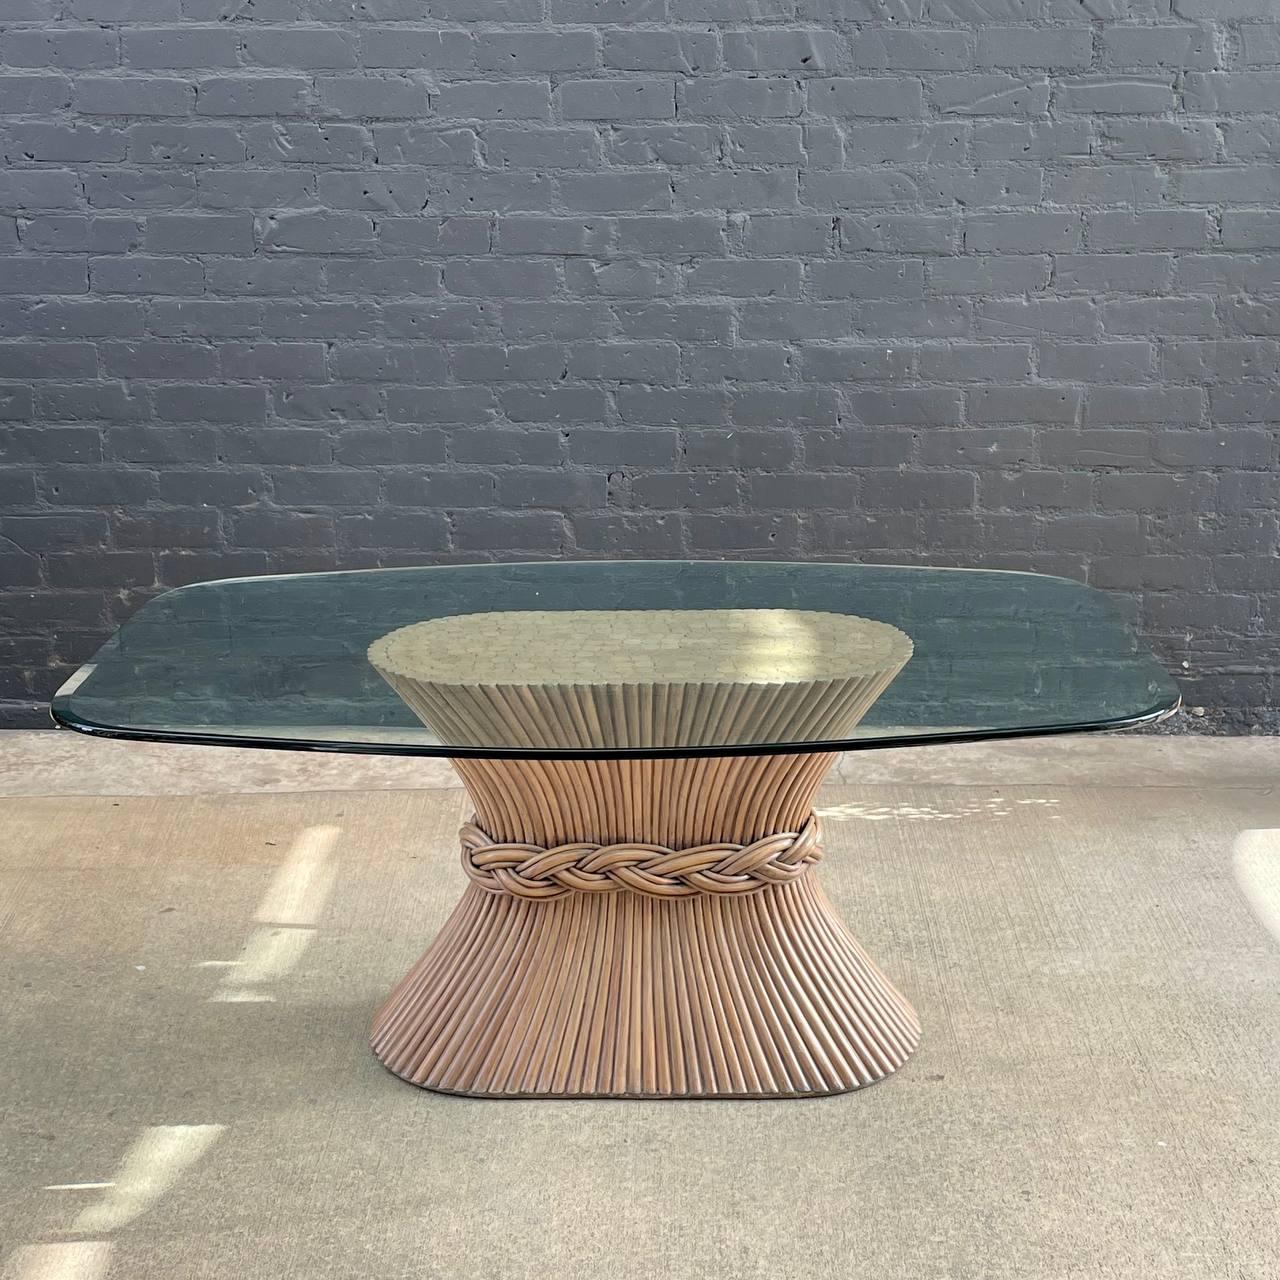 Signed Vintage Boho Rattan Sheaf of Wheat Dining Table with Glass Top by McGuire

Designer: McGuire
Country: United States
Manufacturer: McGuire
Materials: Rattan, Glass
Style: Boho Hollywood Regency 
Year: